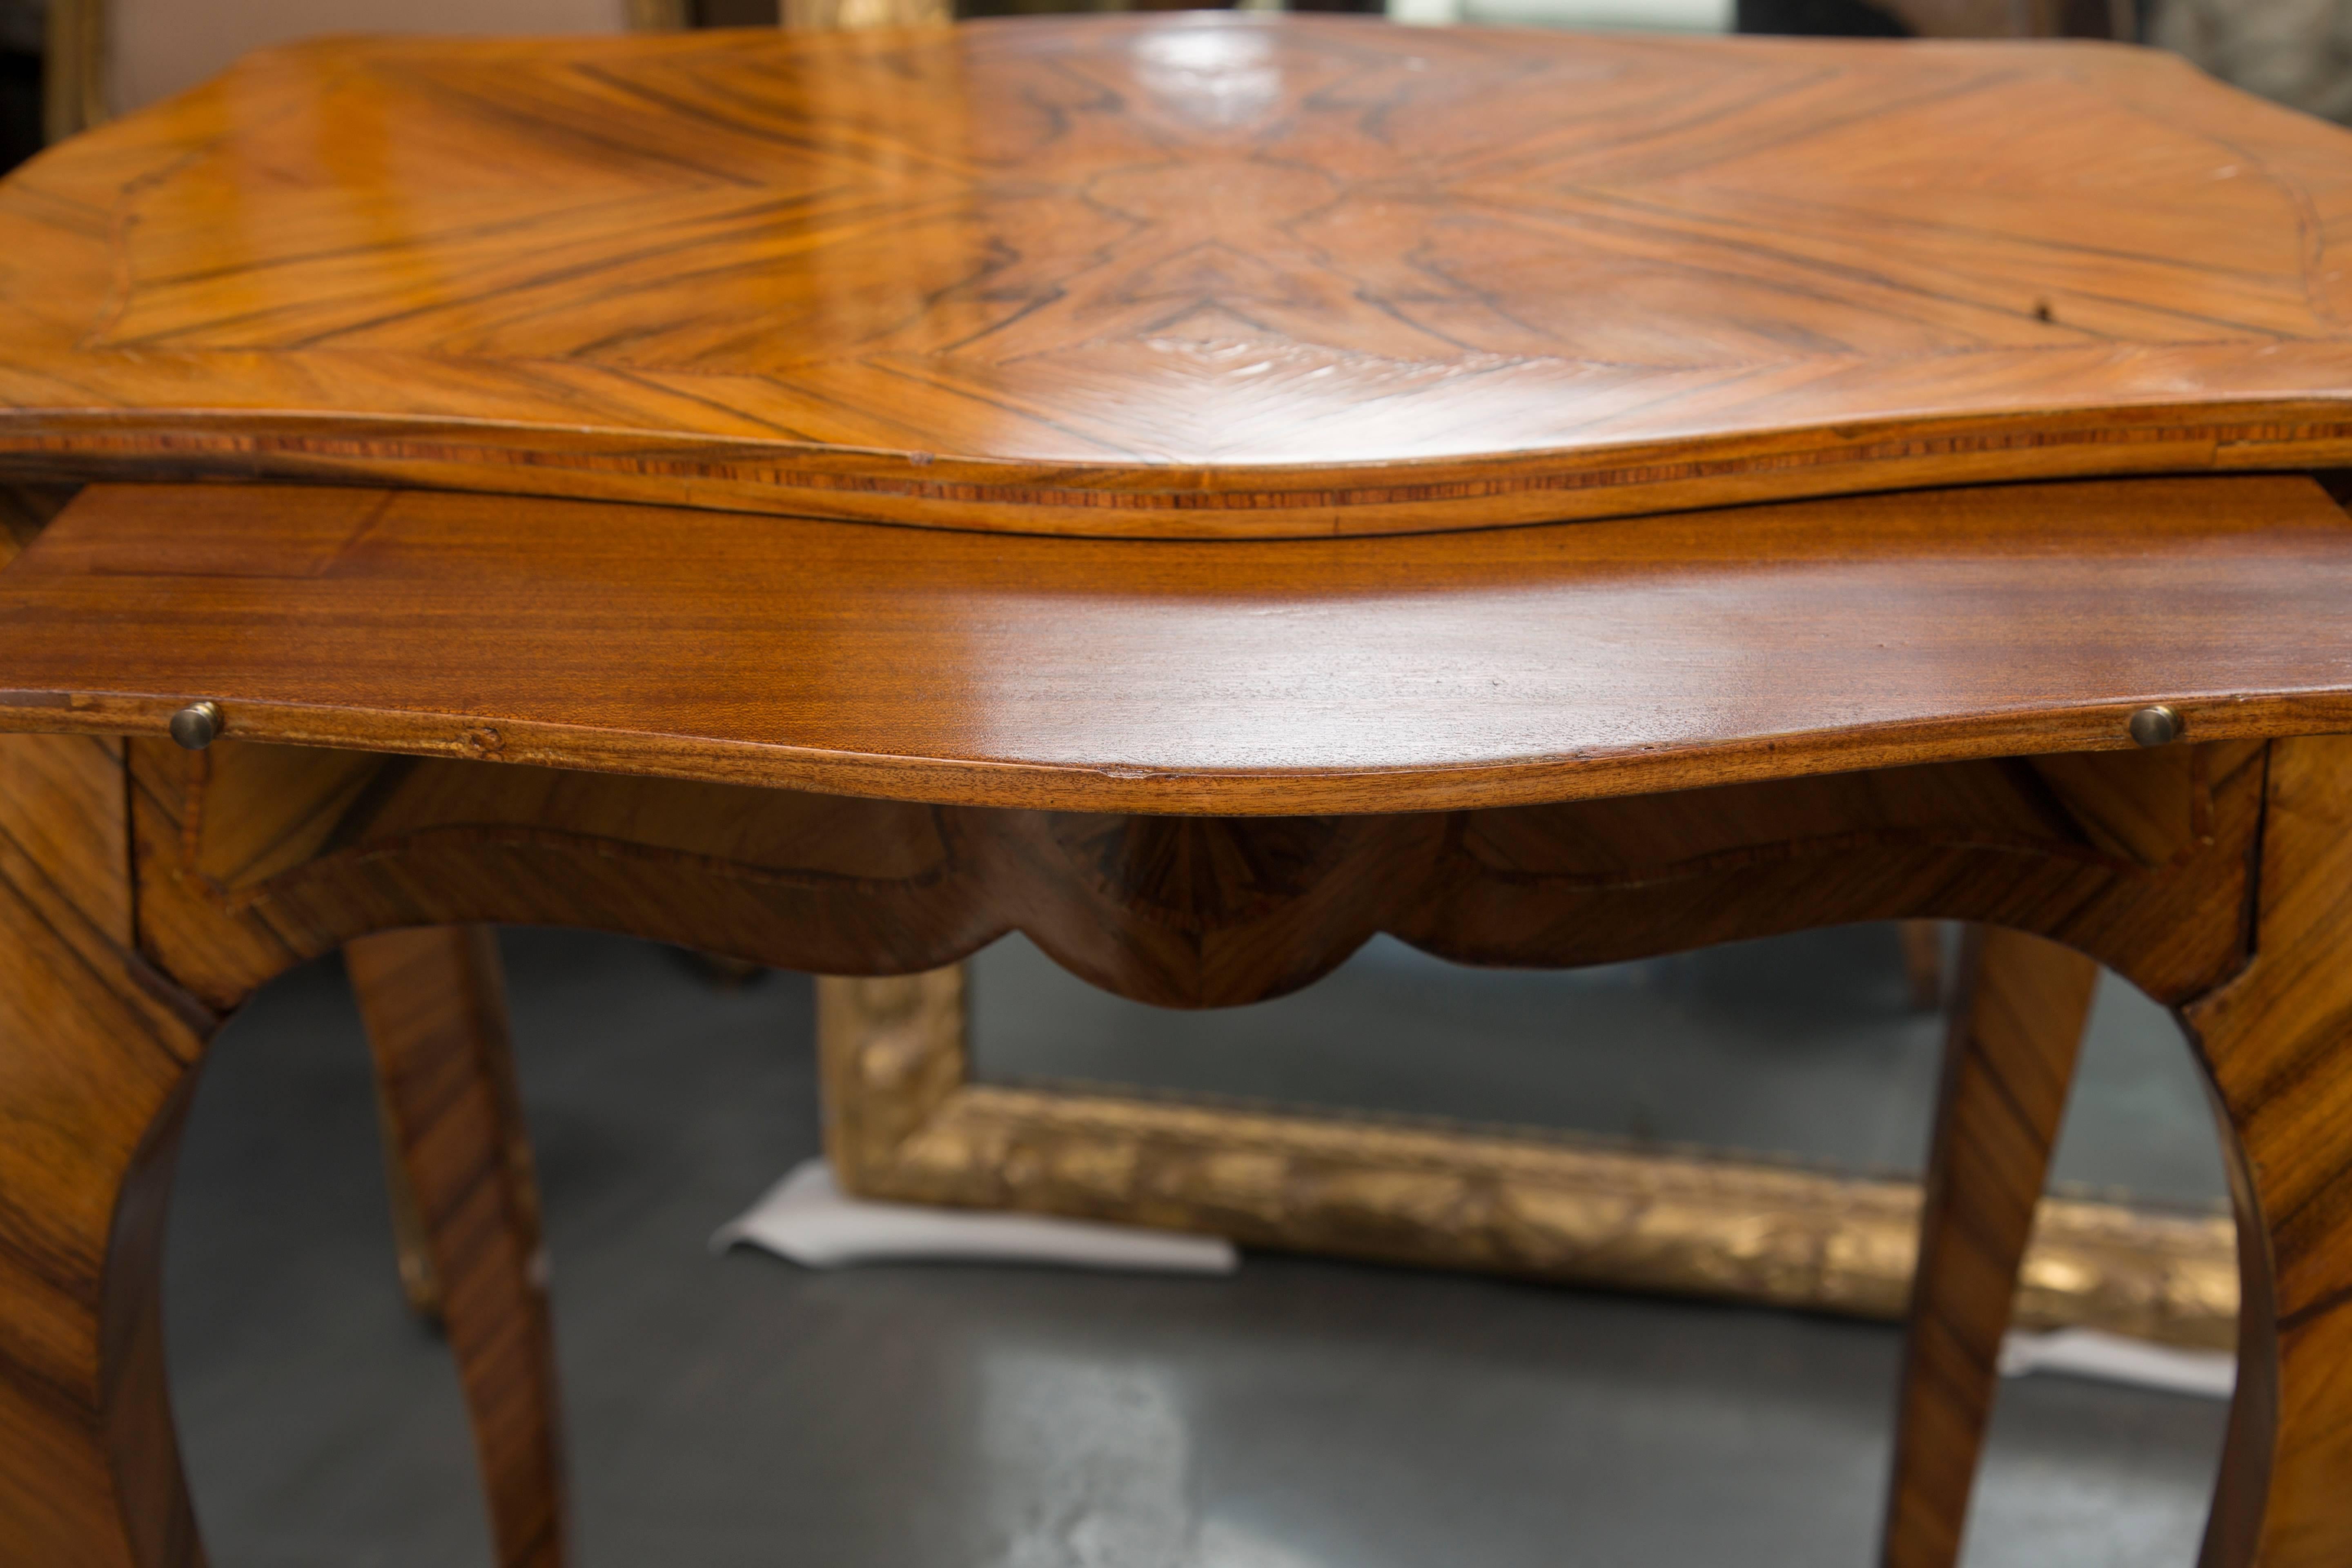 This Louis XV style kingwood table has a cartouche shaped top with mirrored veneers over a brush slide and frieze drawer, supported by graceful slender cabriole legs joined by a plateau stretcher replicating mirrored veneers of the top, circa 19th